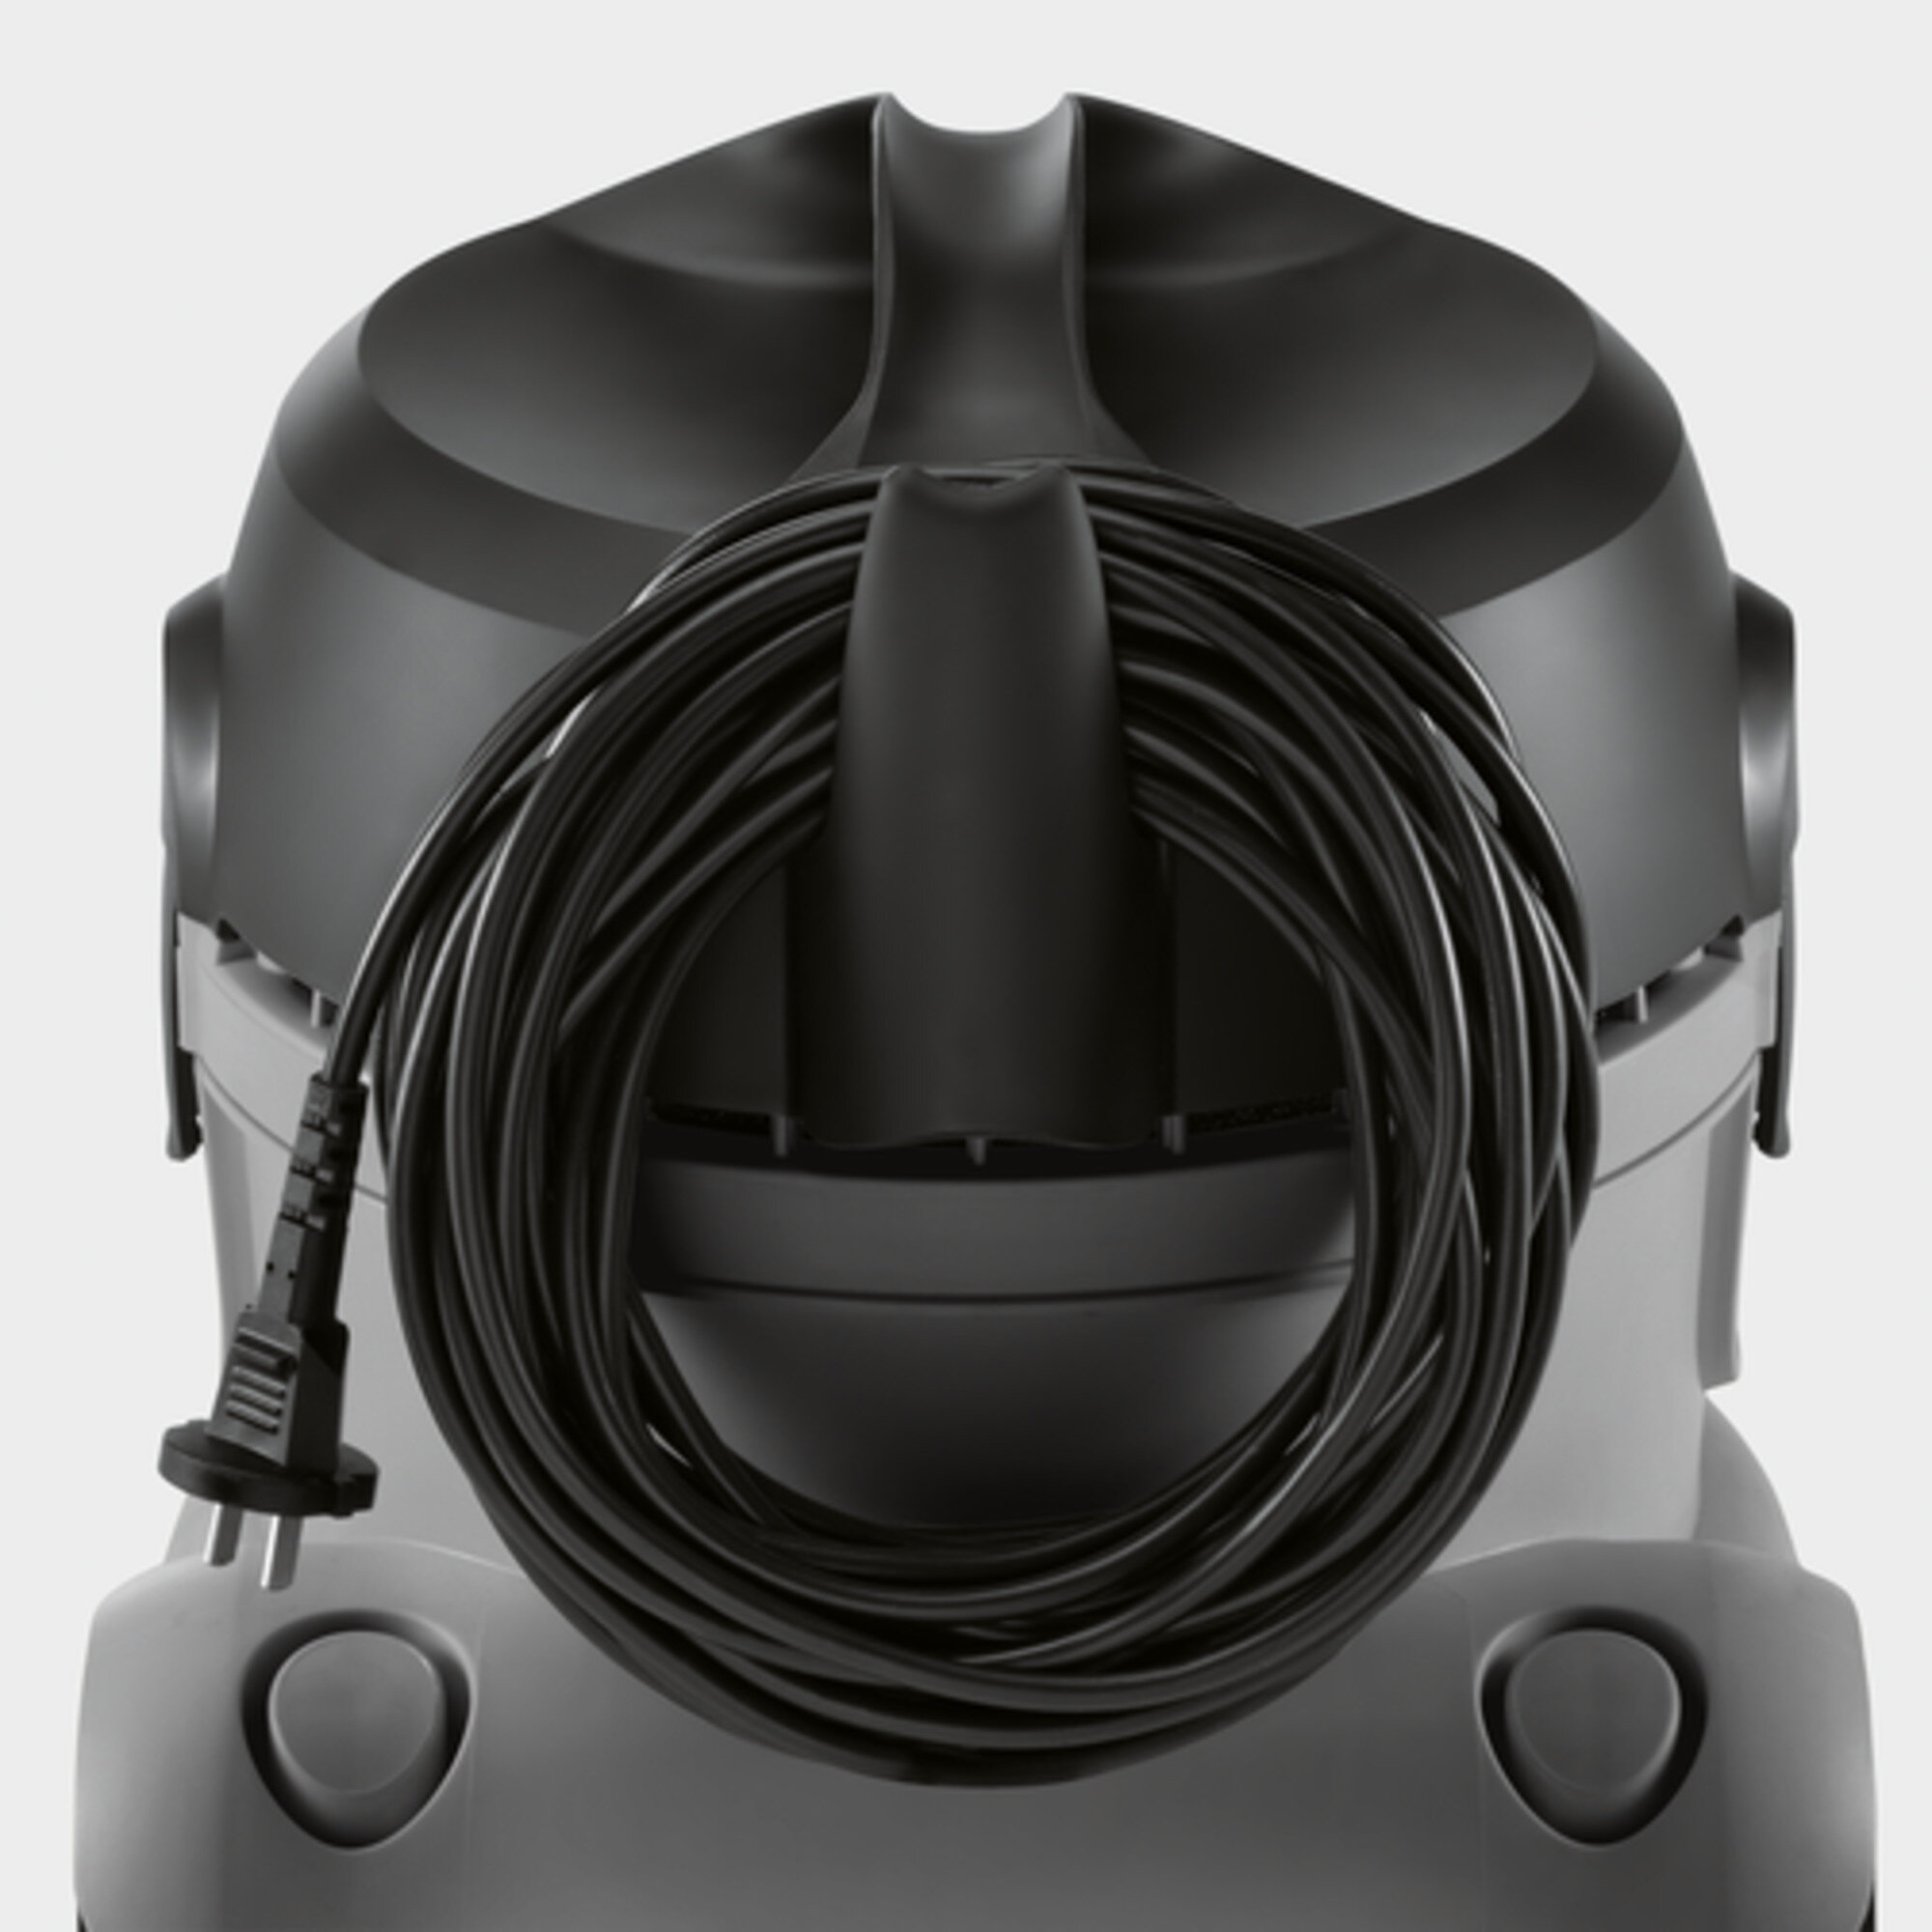 Dry vacuum cleaner T 8/1 Classic: Large cord hook